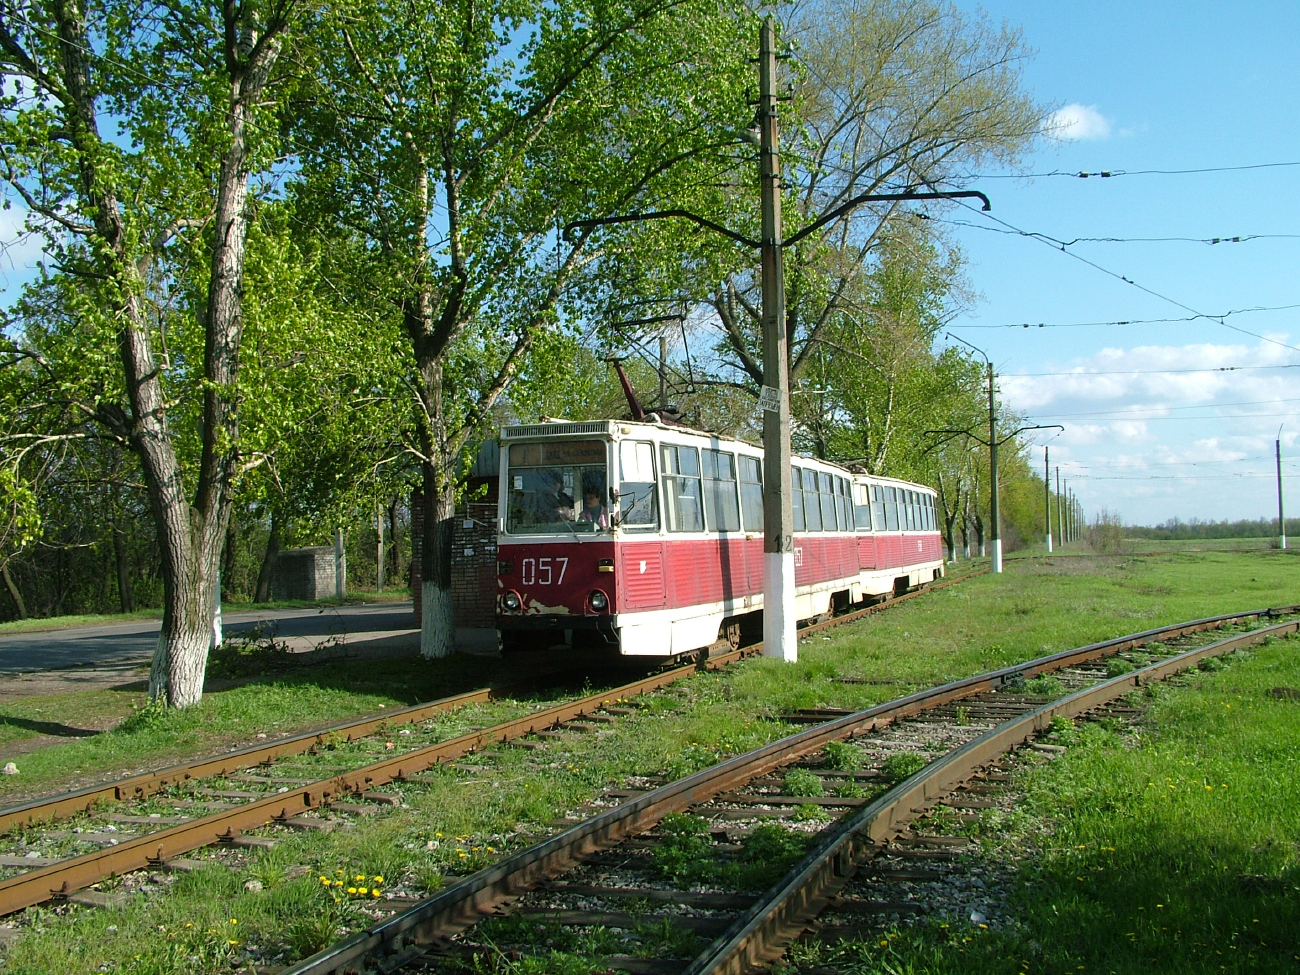 Avgyejevka, 71-605 (KTM-5M3) — 057; Avgyejevka, 71-605 (KTM-5M3) — 058; Avgyejevka — Lines and Infrastructure